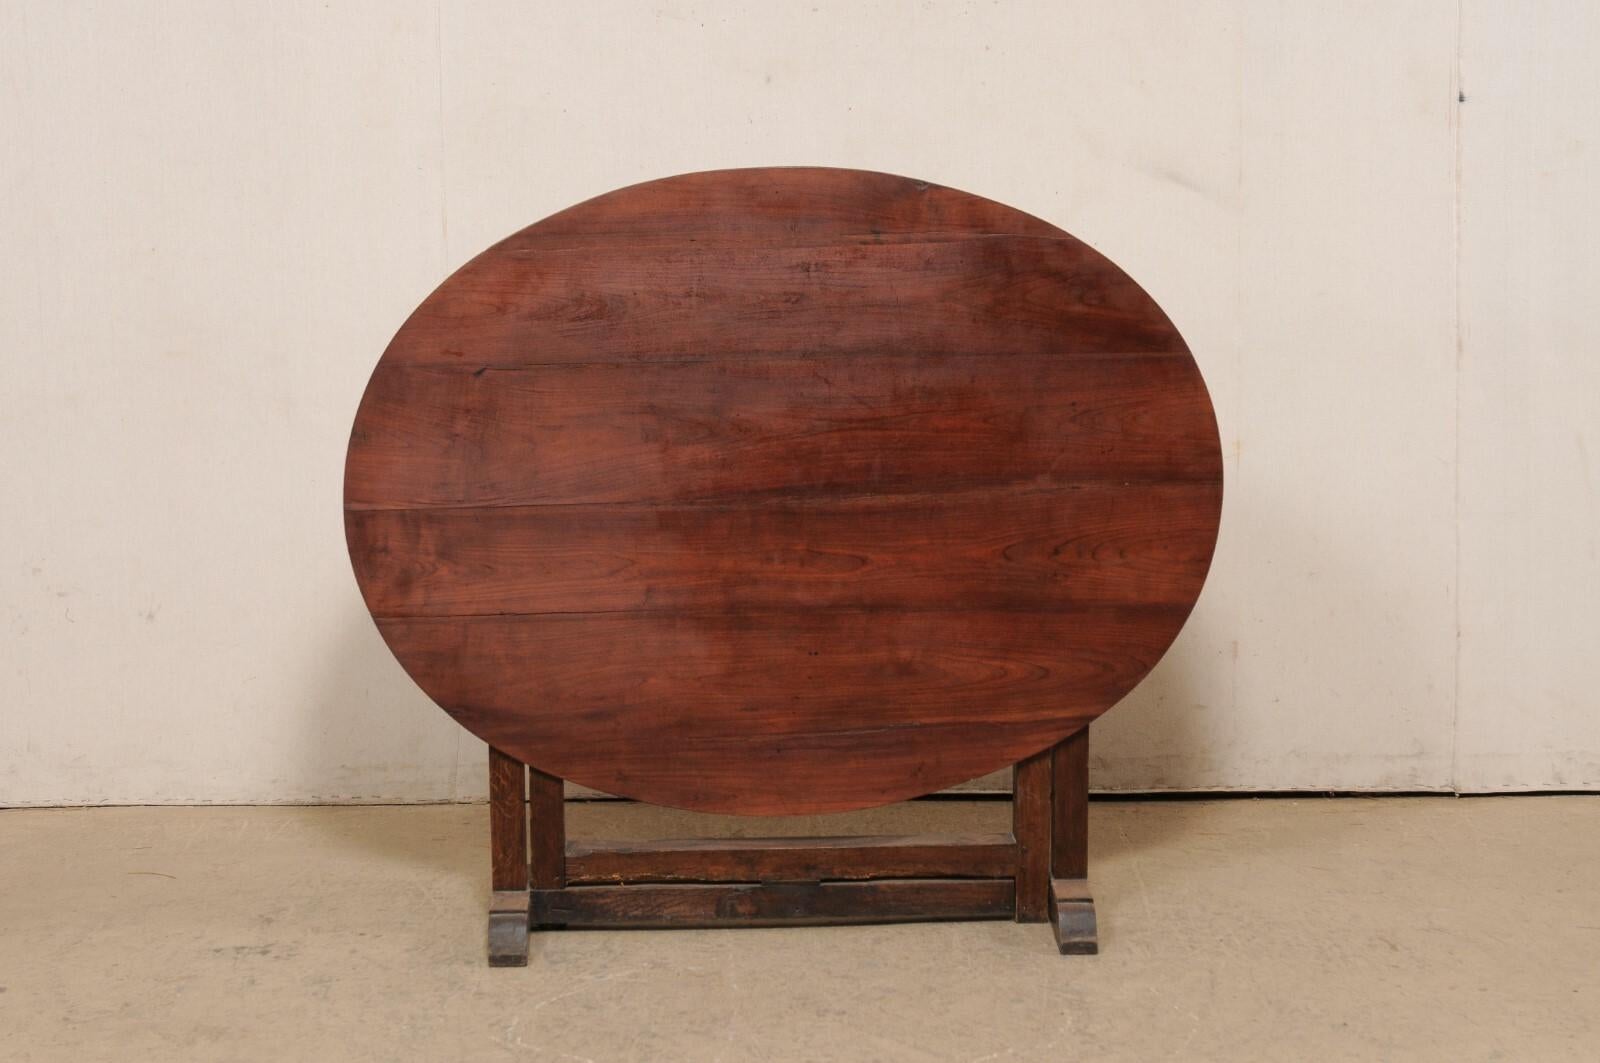 A French tilt-top wooden wine tasting table from the early 20th century. This antique table from France features an oval-shaped tilt top, which was the signature of wine tasting tables during this time. When in use, the top is supported with a boxed